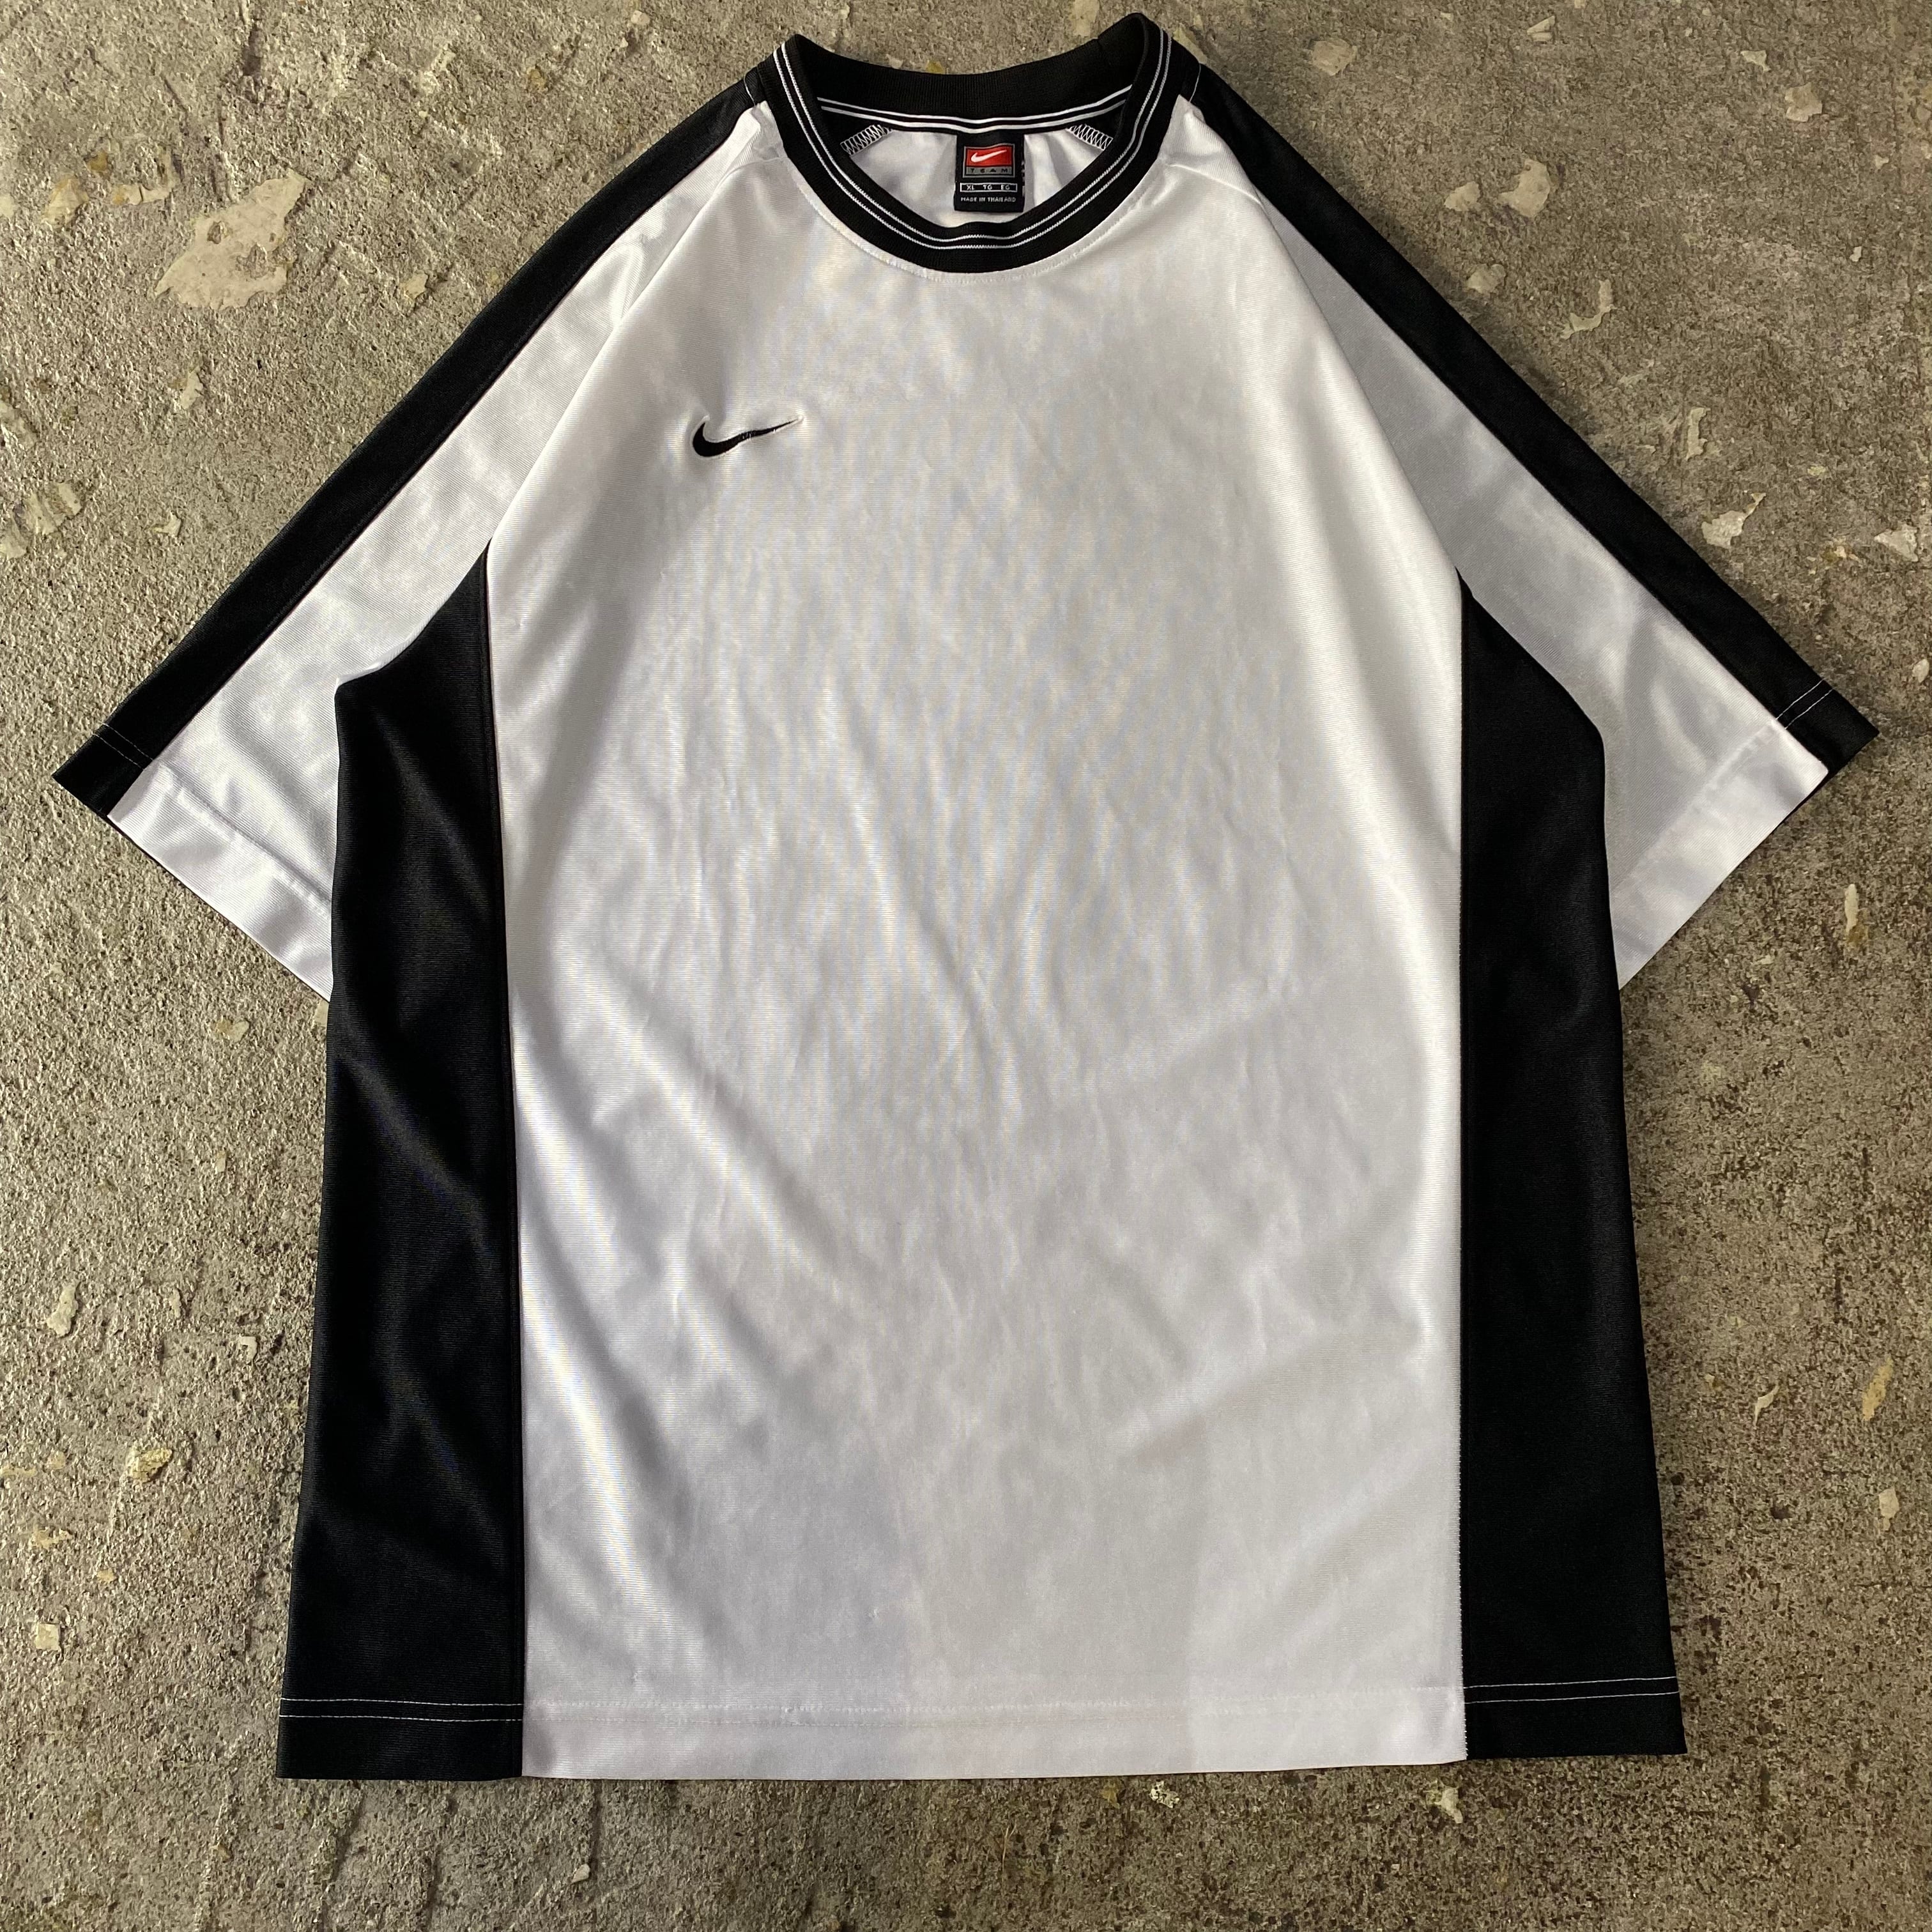 90s NIKE game shirt | What’z up powered by BASE